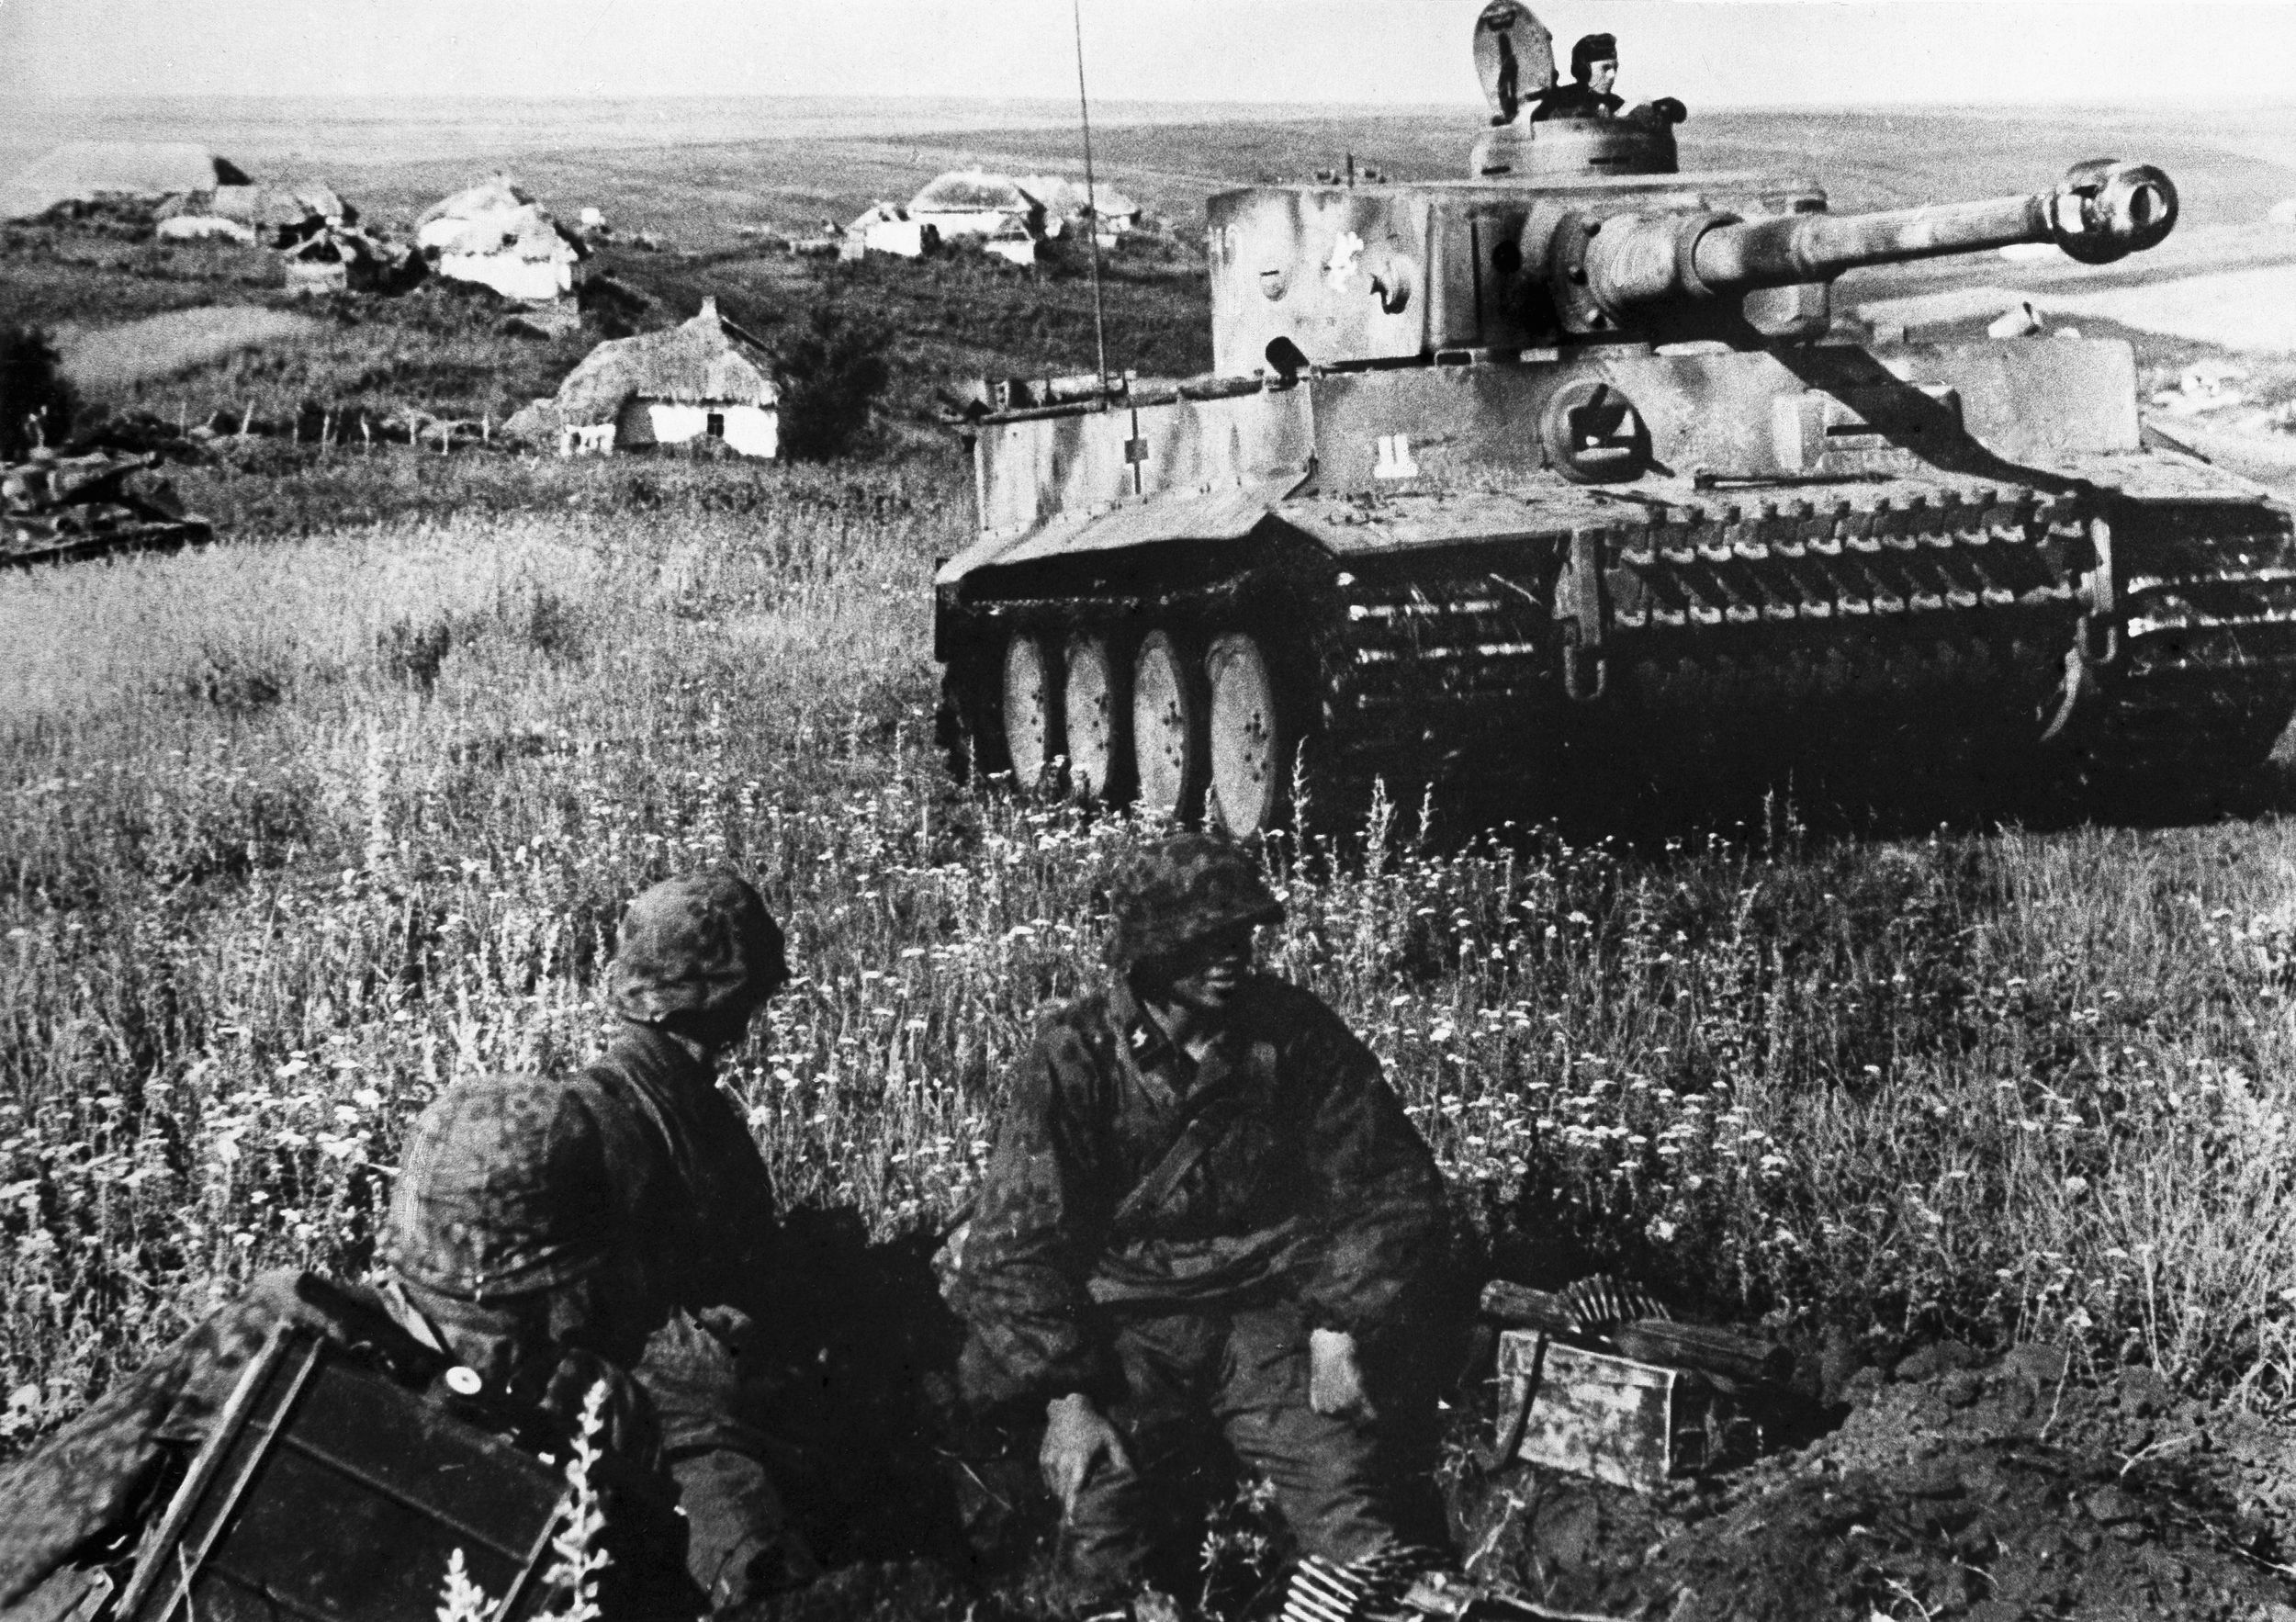 A pair of German panzergrenadiers manning a defensive position pause as a mammoth Mark VI Tiger Tank rumbles past. The open steppes of Russia proved ideal country for the maneuverability of tanks and armored formations. 